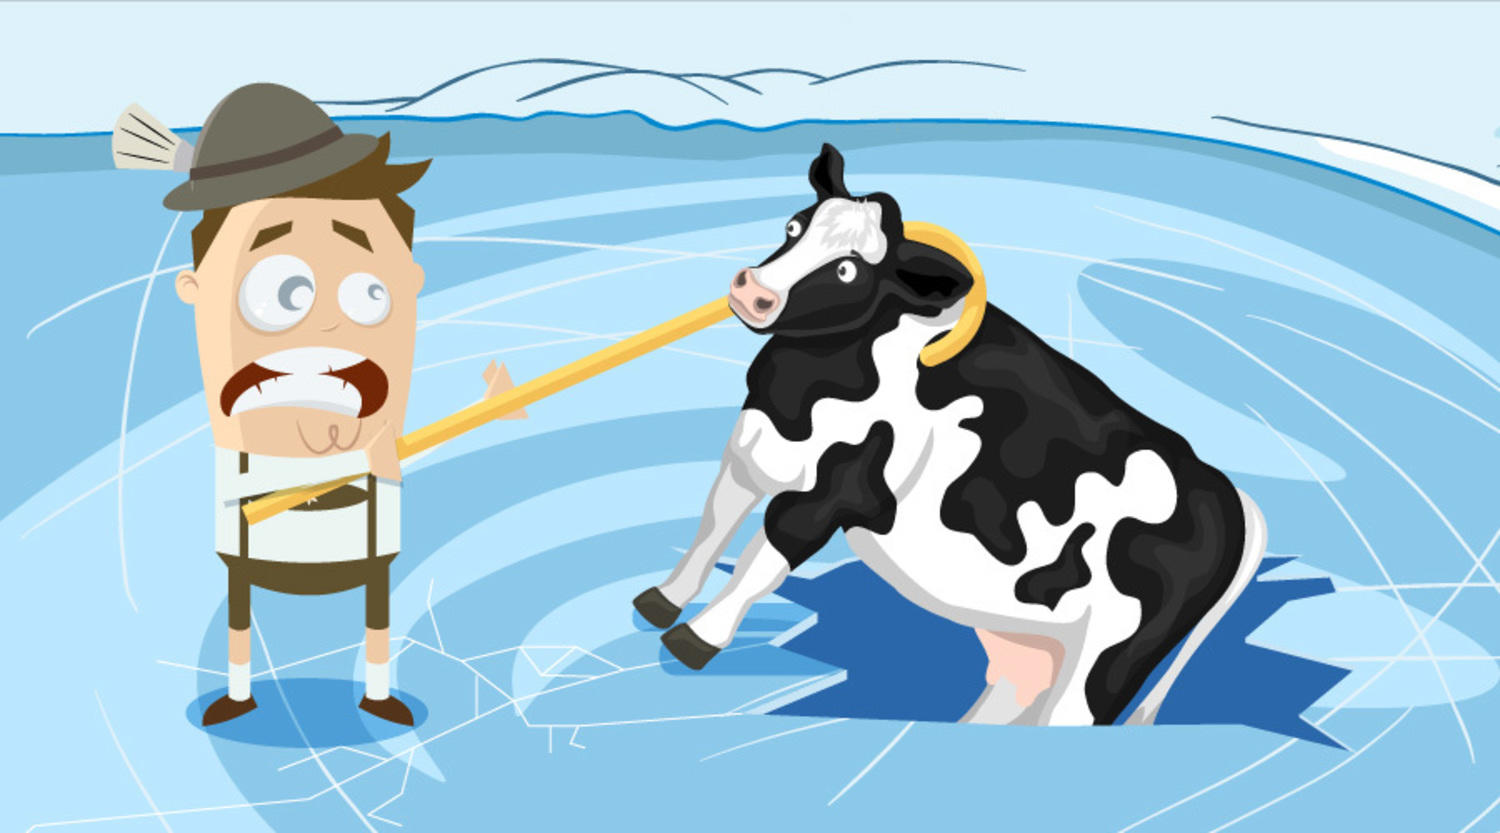 German Character Saving Cow From Ice.0d3987a5e5ece0c6bb012b72583d3e01